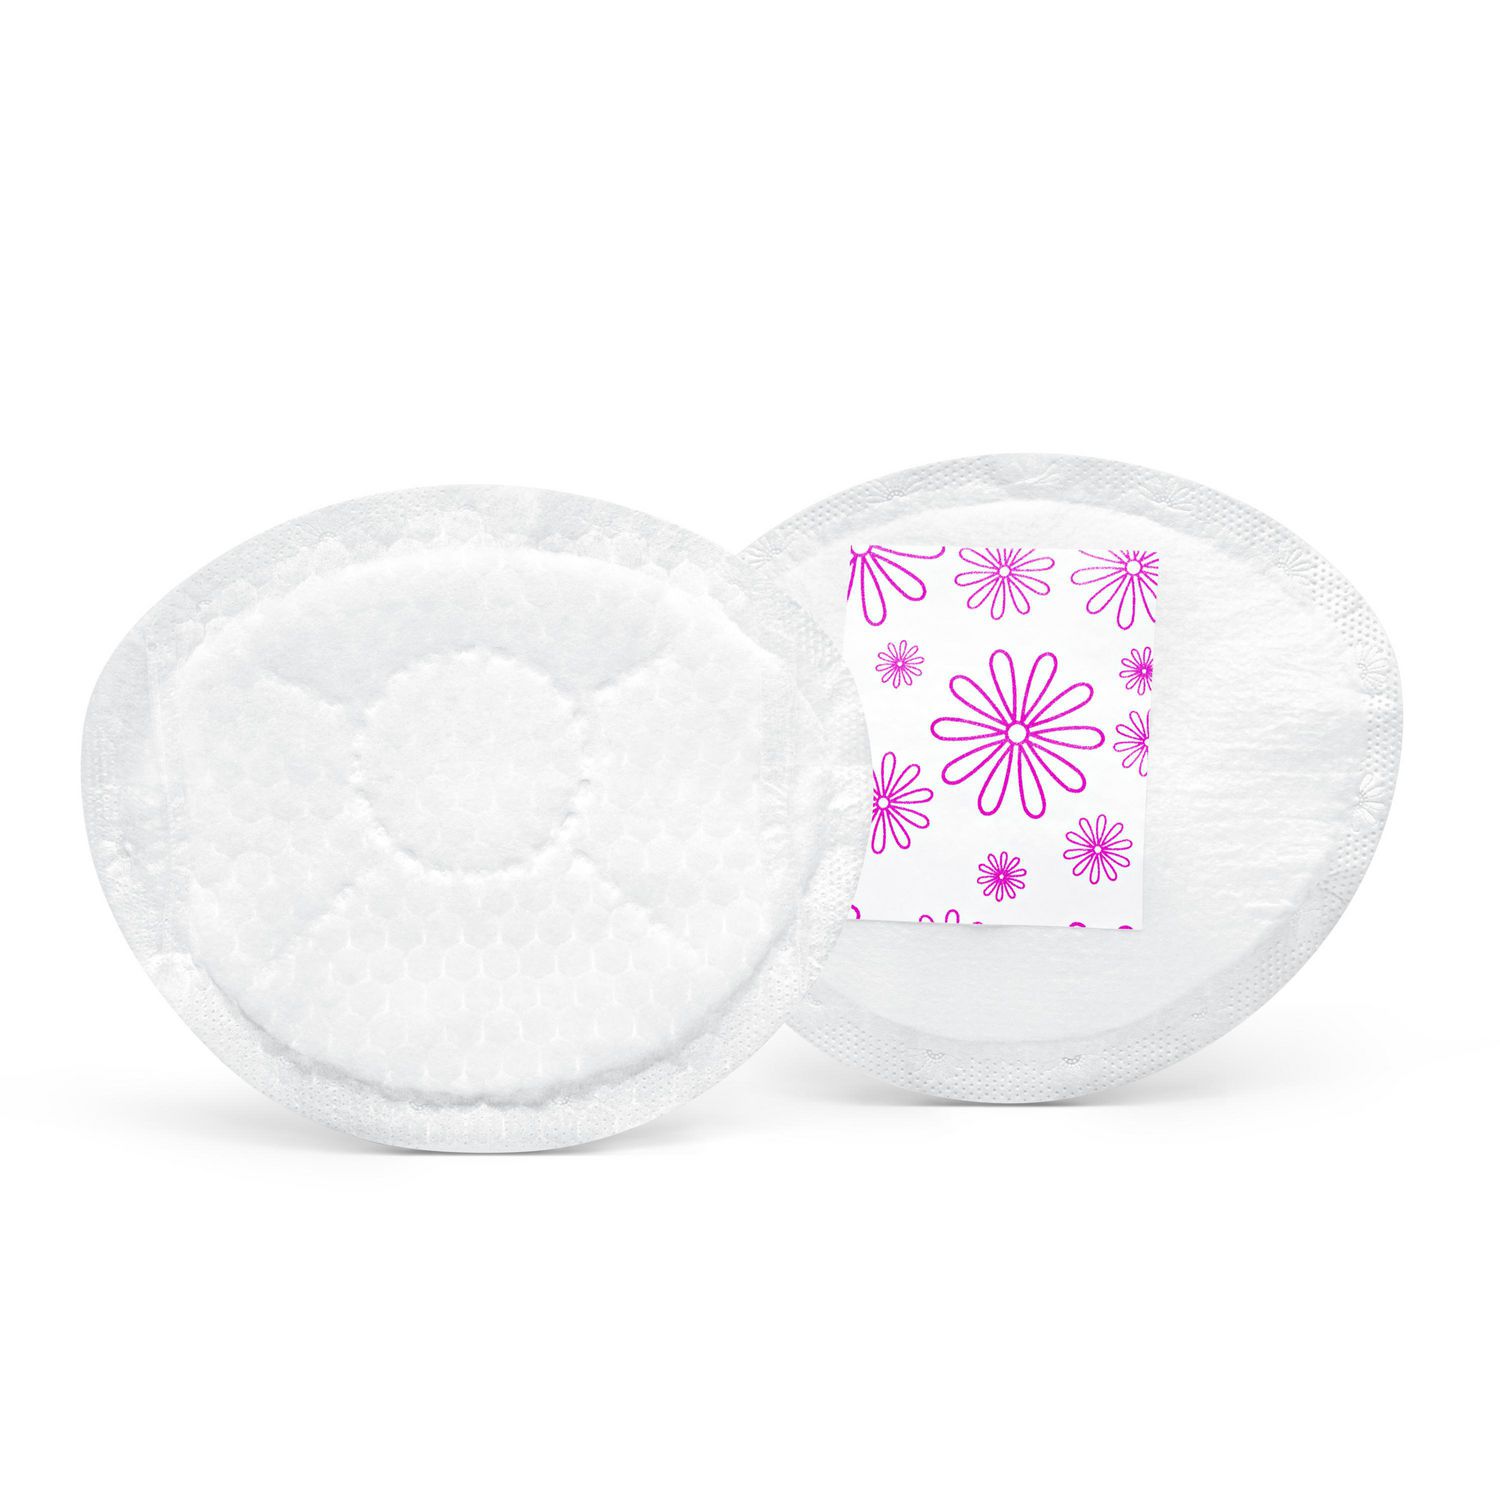 Mommy's Precious Disposable Cotton Nursing Pads 132 Packs for